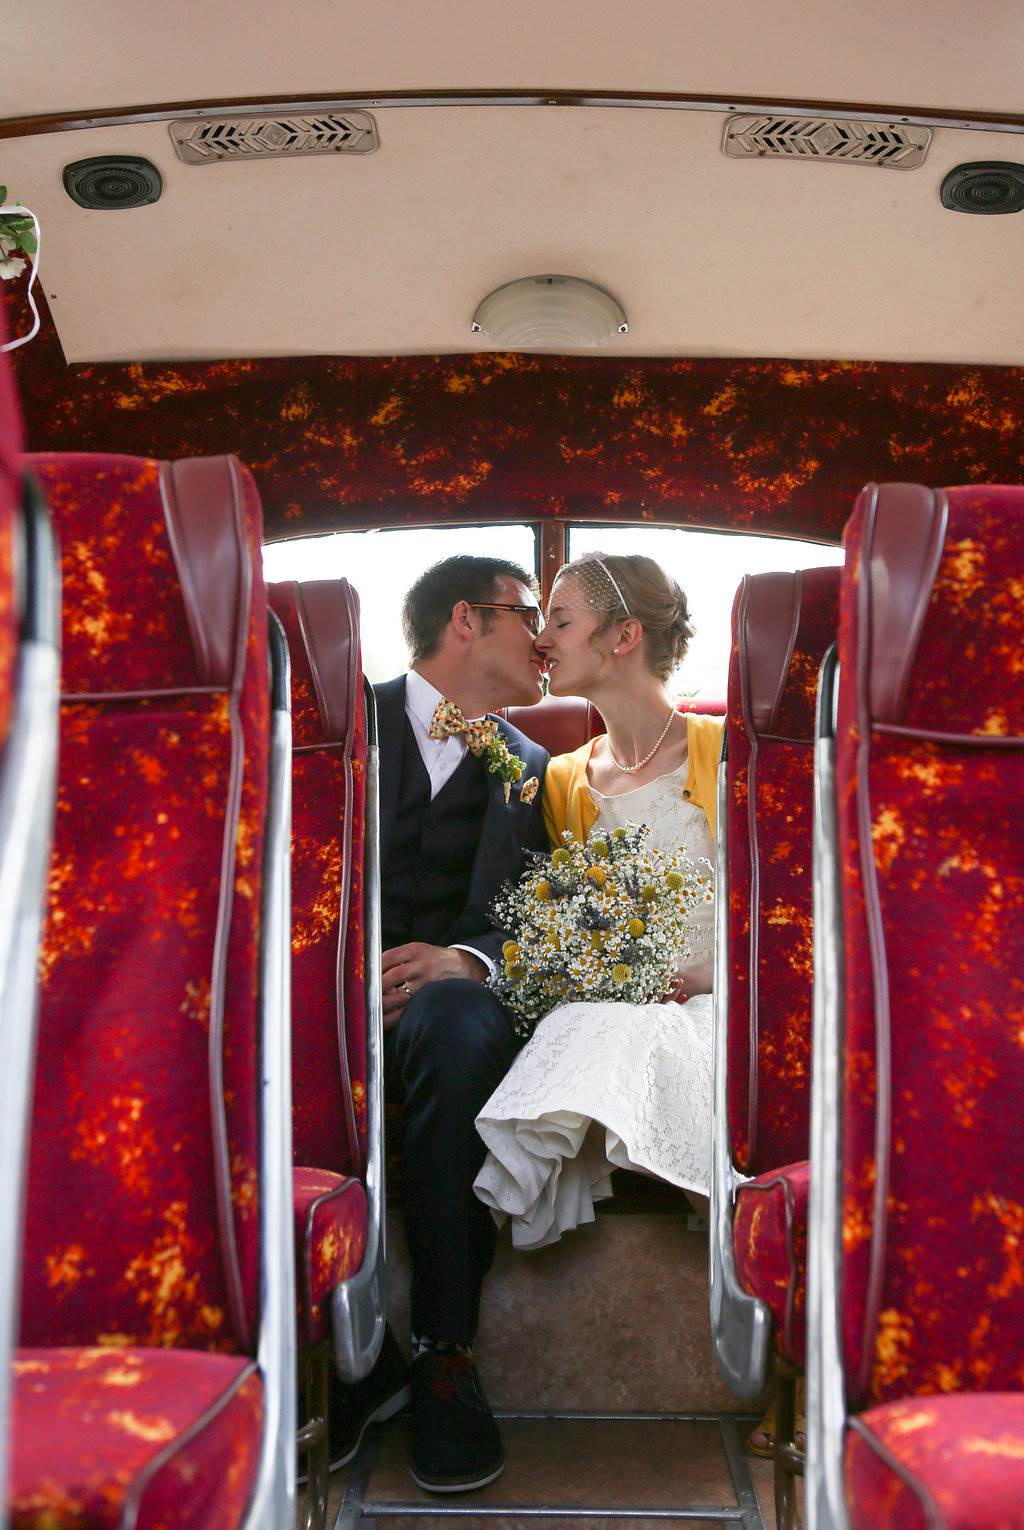 Maria and Dans DIY vintage wedding photographed by Bethan Haywood Jones as featured on The National Vintage Wedding Fair blog